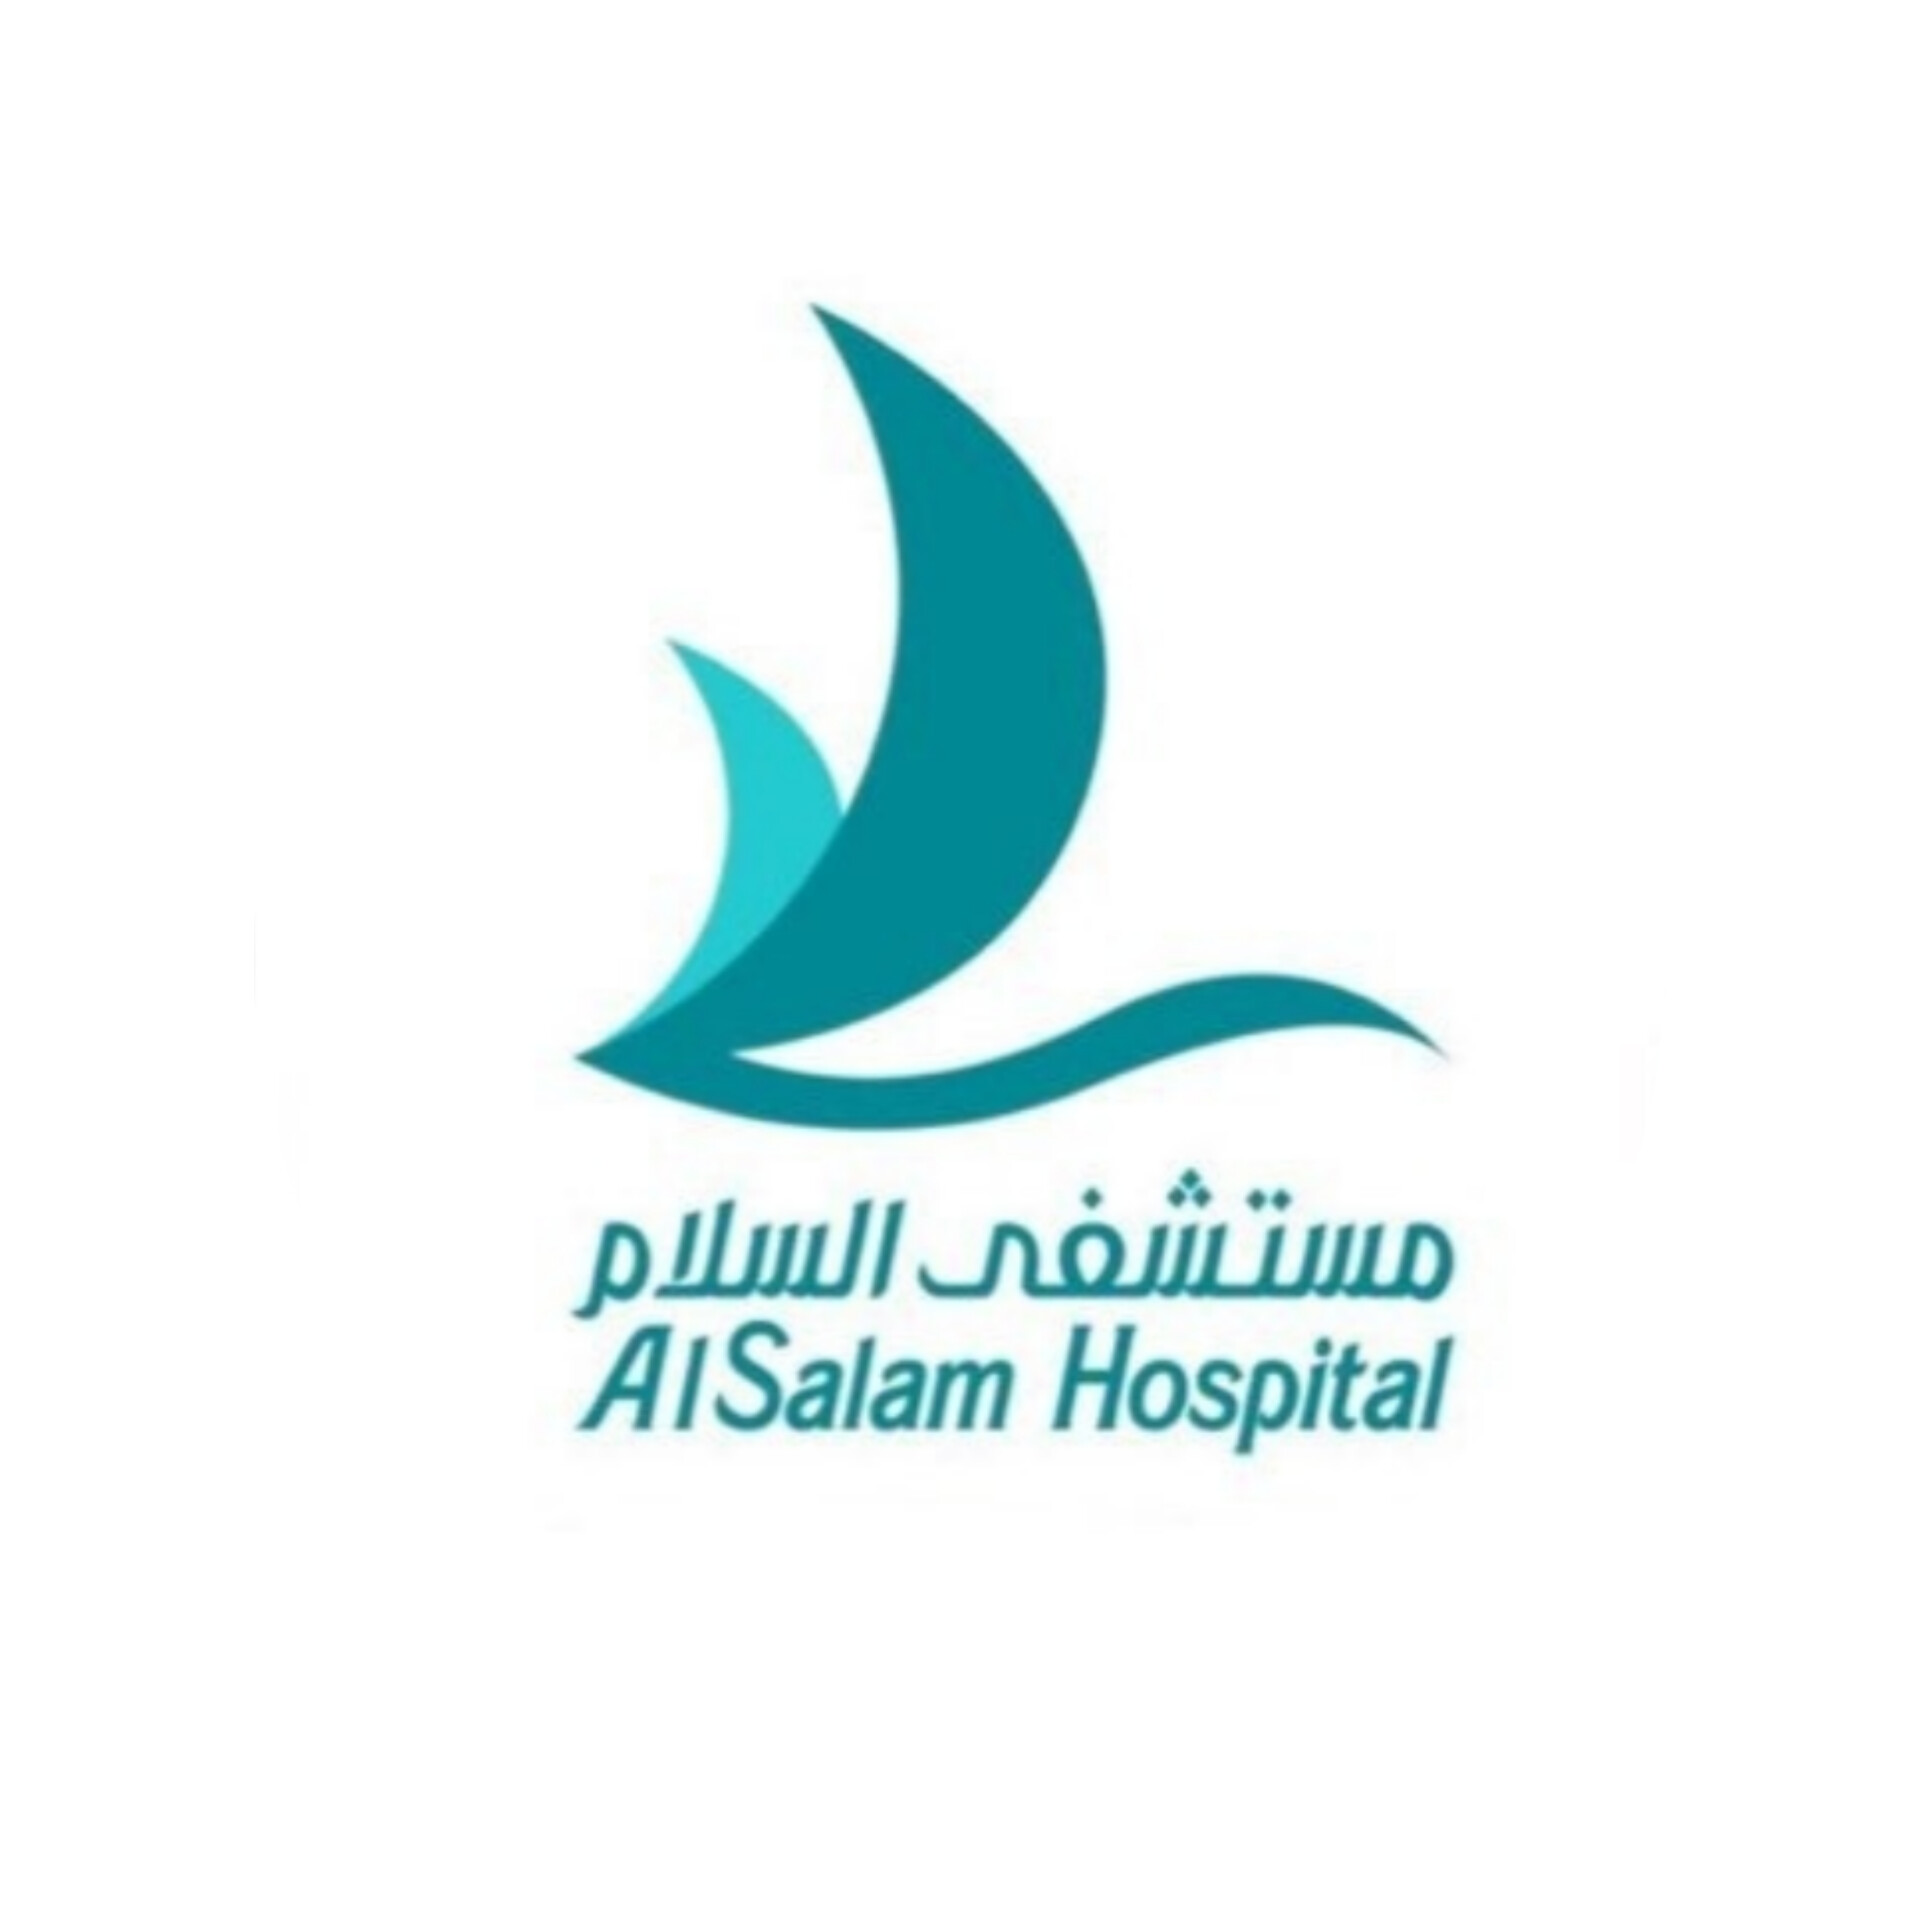 Al Salam Al Assima Hospital: Leader of Excellence in Health Care